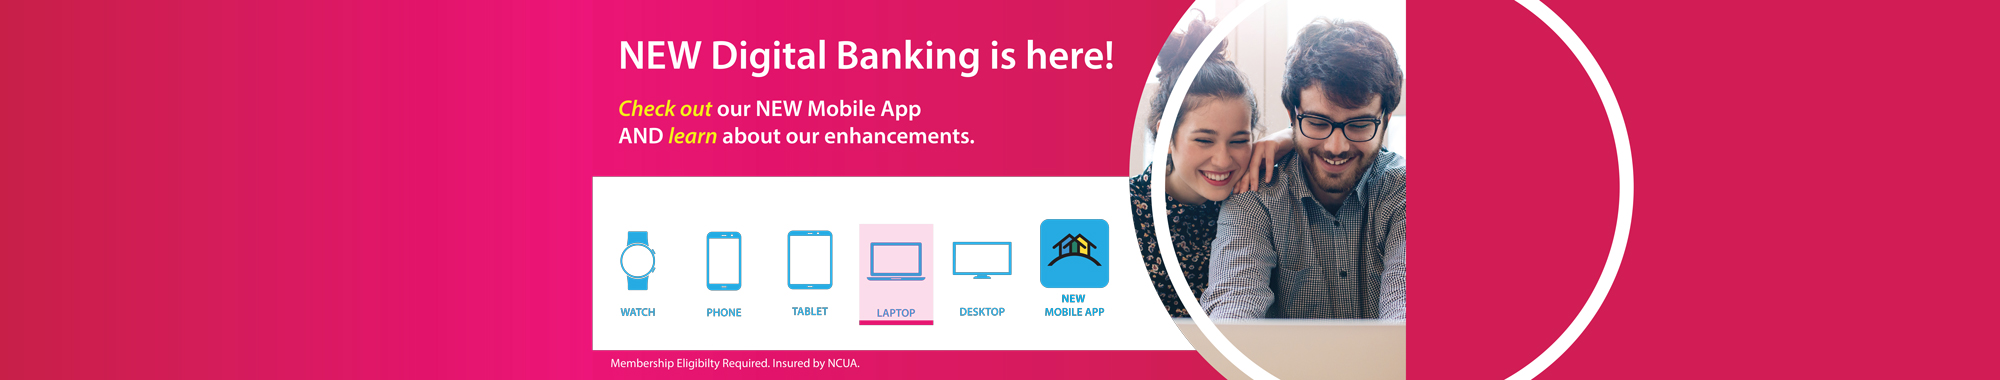 NEW Digital Banking is here! Check out our NEW Mobile App AND learn about our enhancements.
NEW Mobile App: Watch, Phone, Tablet, Laptop, Desktop